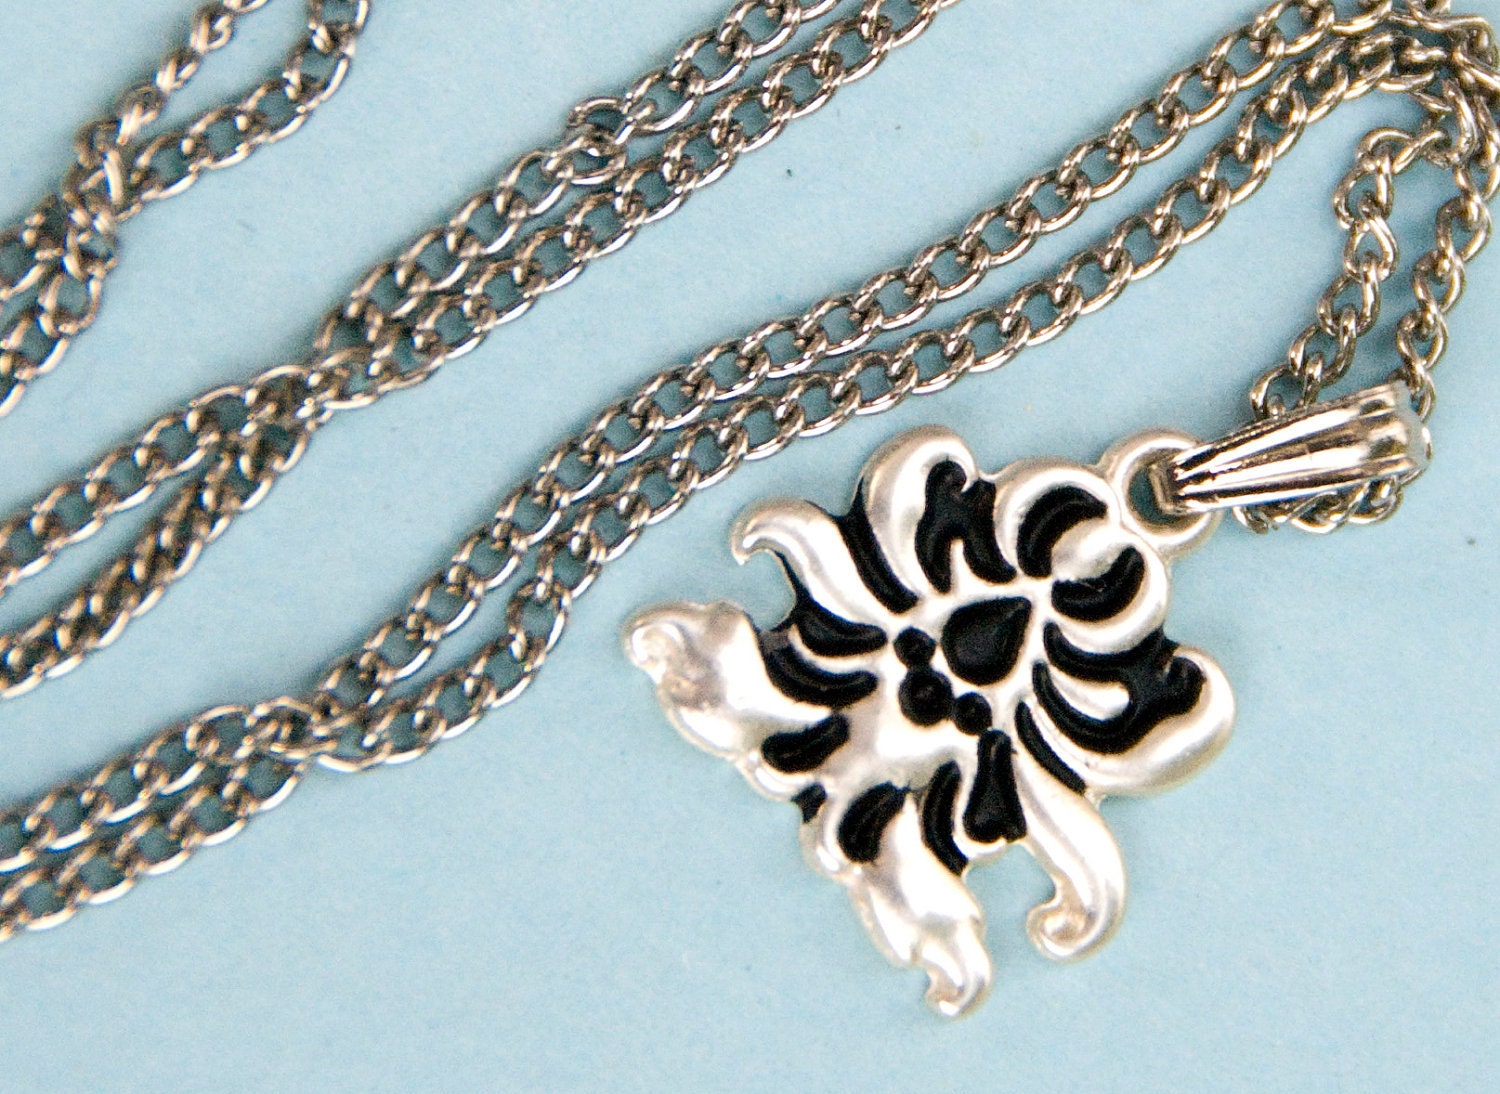 Lotus Flower Silver Necklace 50 of this sale will go to Sea Shepherd